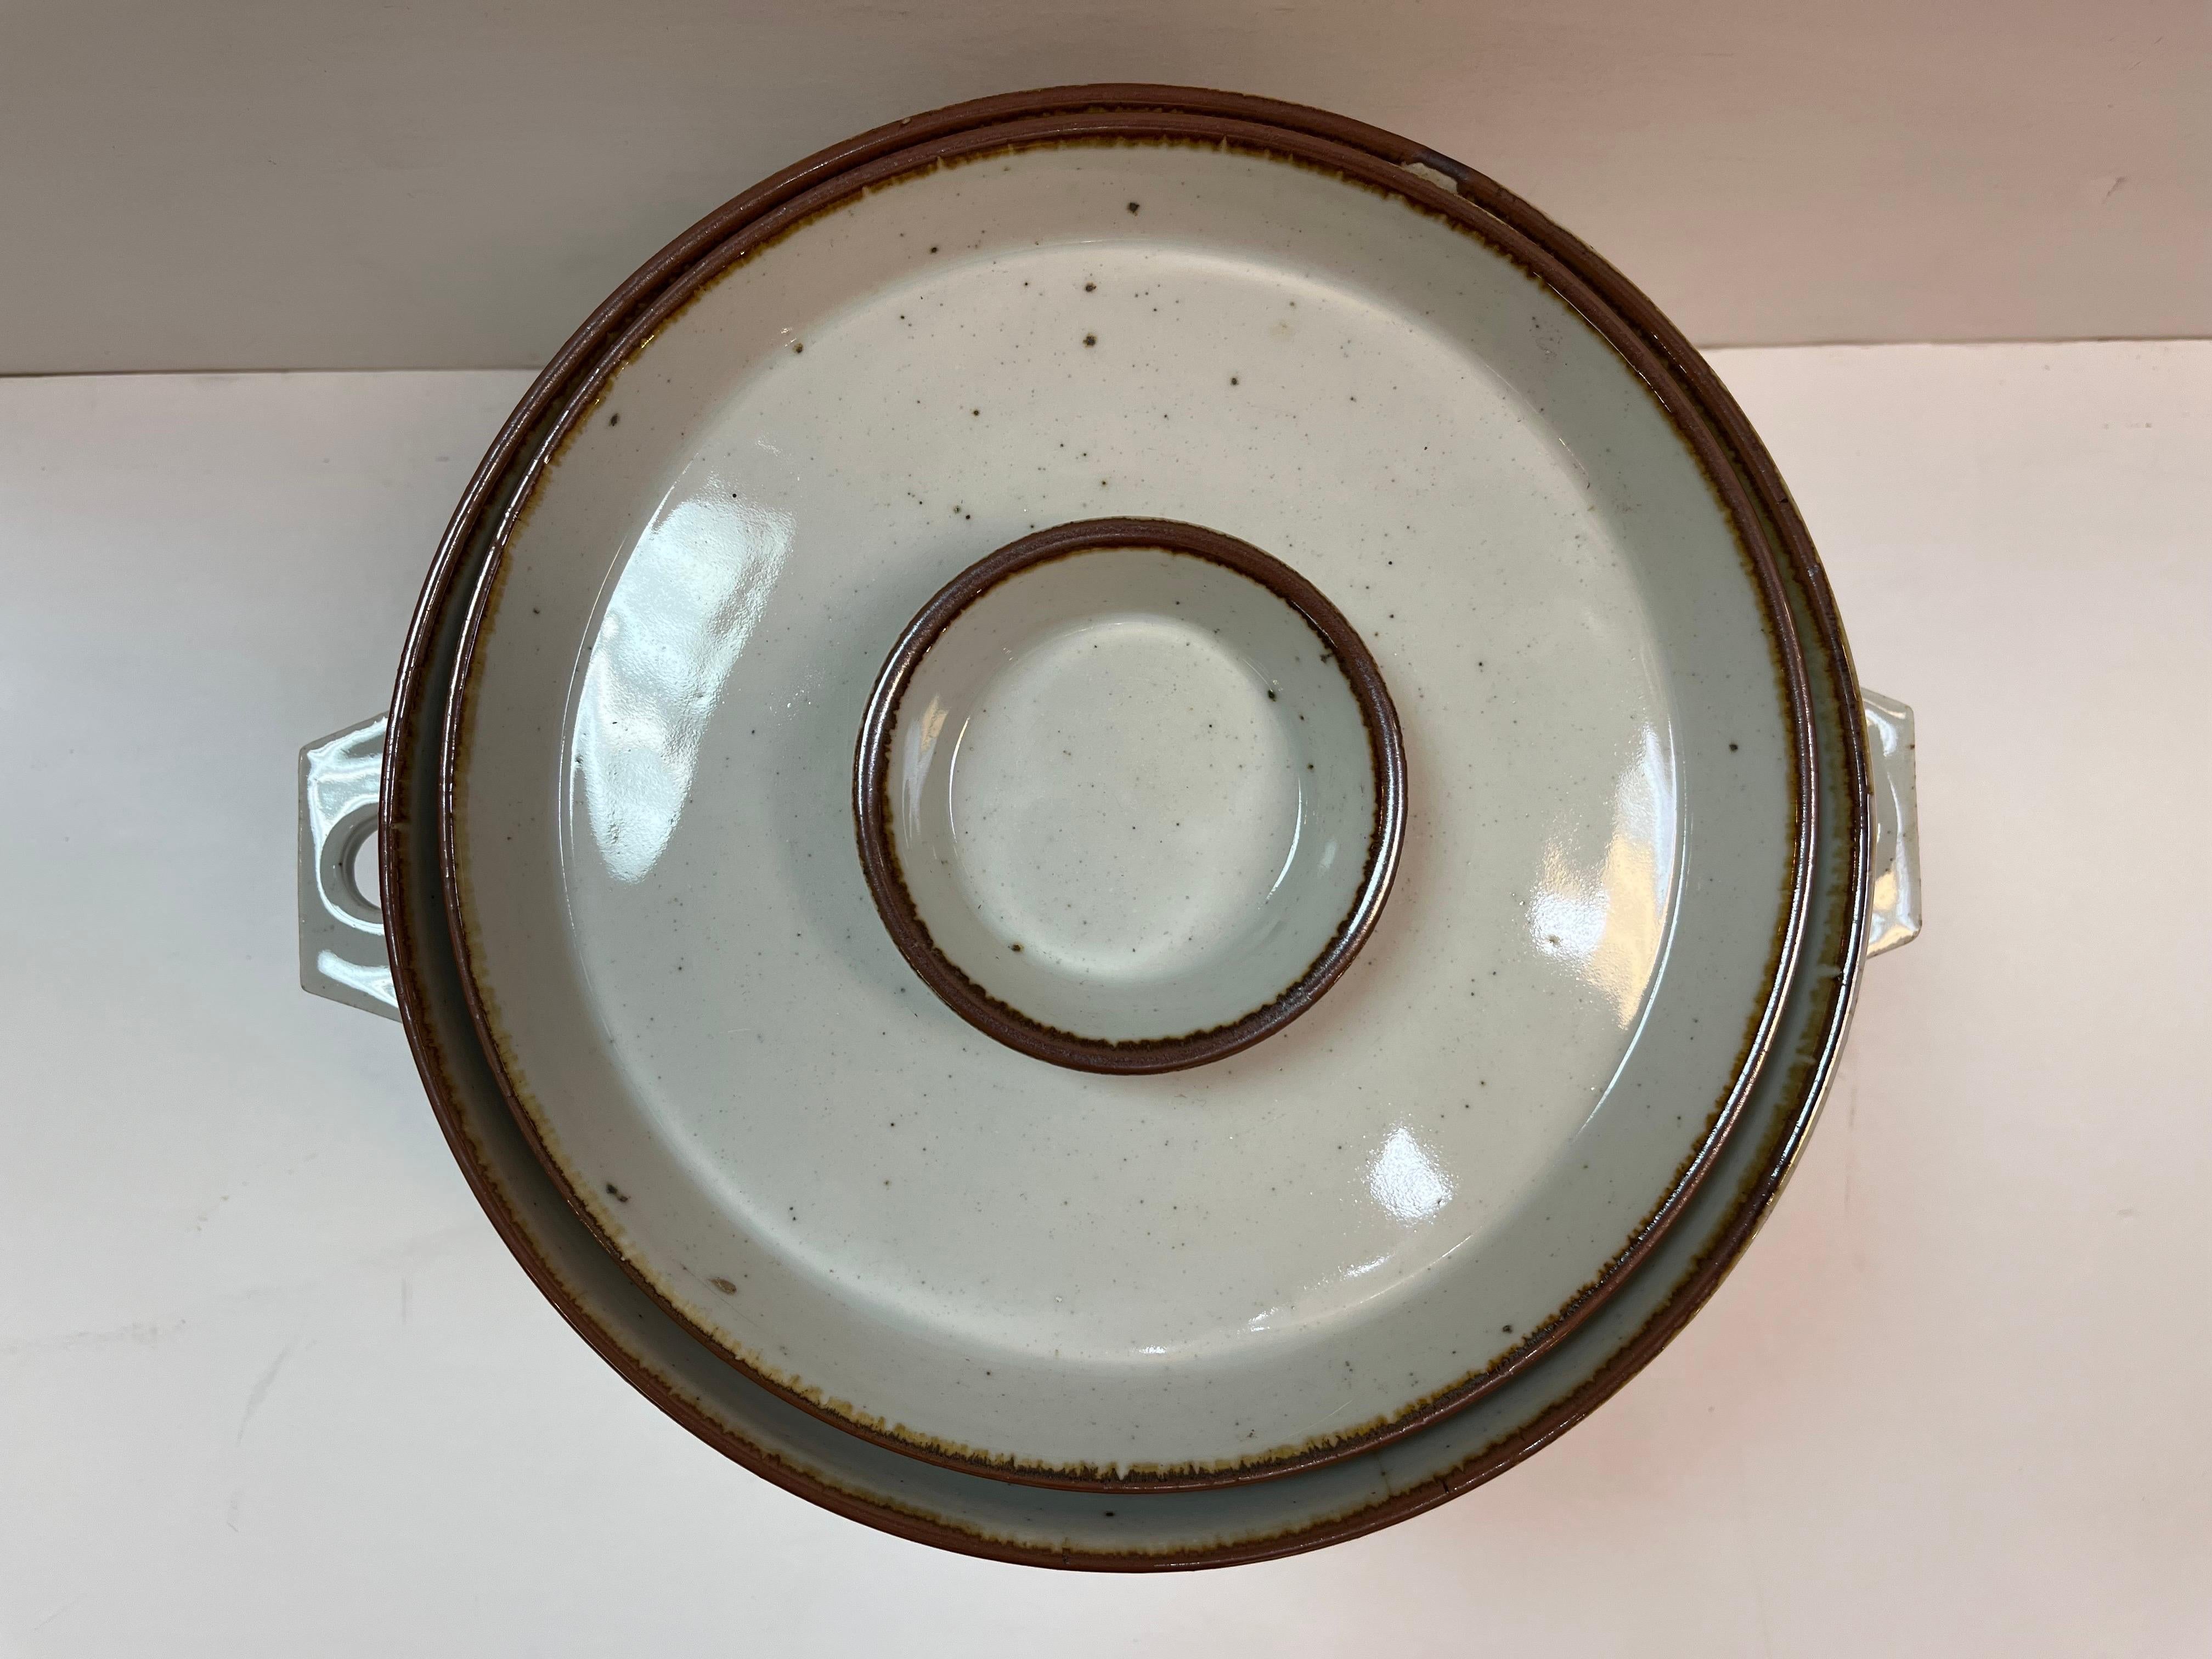 A vintage lidded casserole serving dish in Brown Mist by Niels Refsgaard for Dansk. You may know Dansk, if not don't worry I'll get to them later. For now, let's look at who Niels Refsgaard is. From a Dansk catalog, 